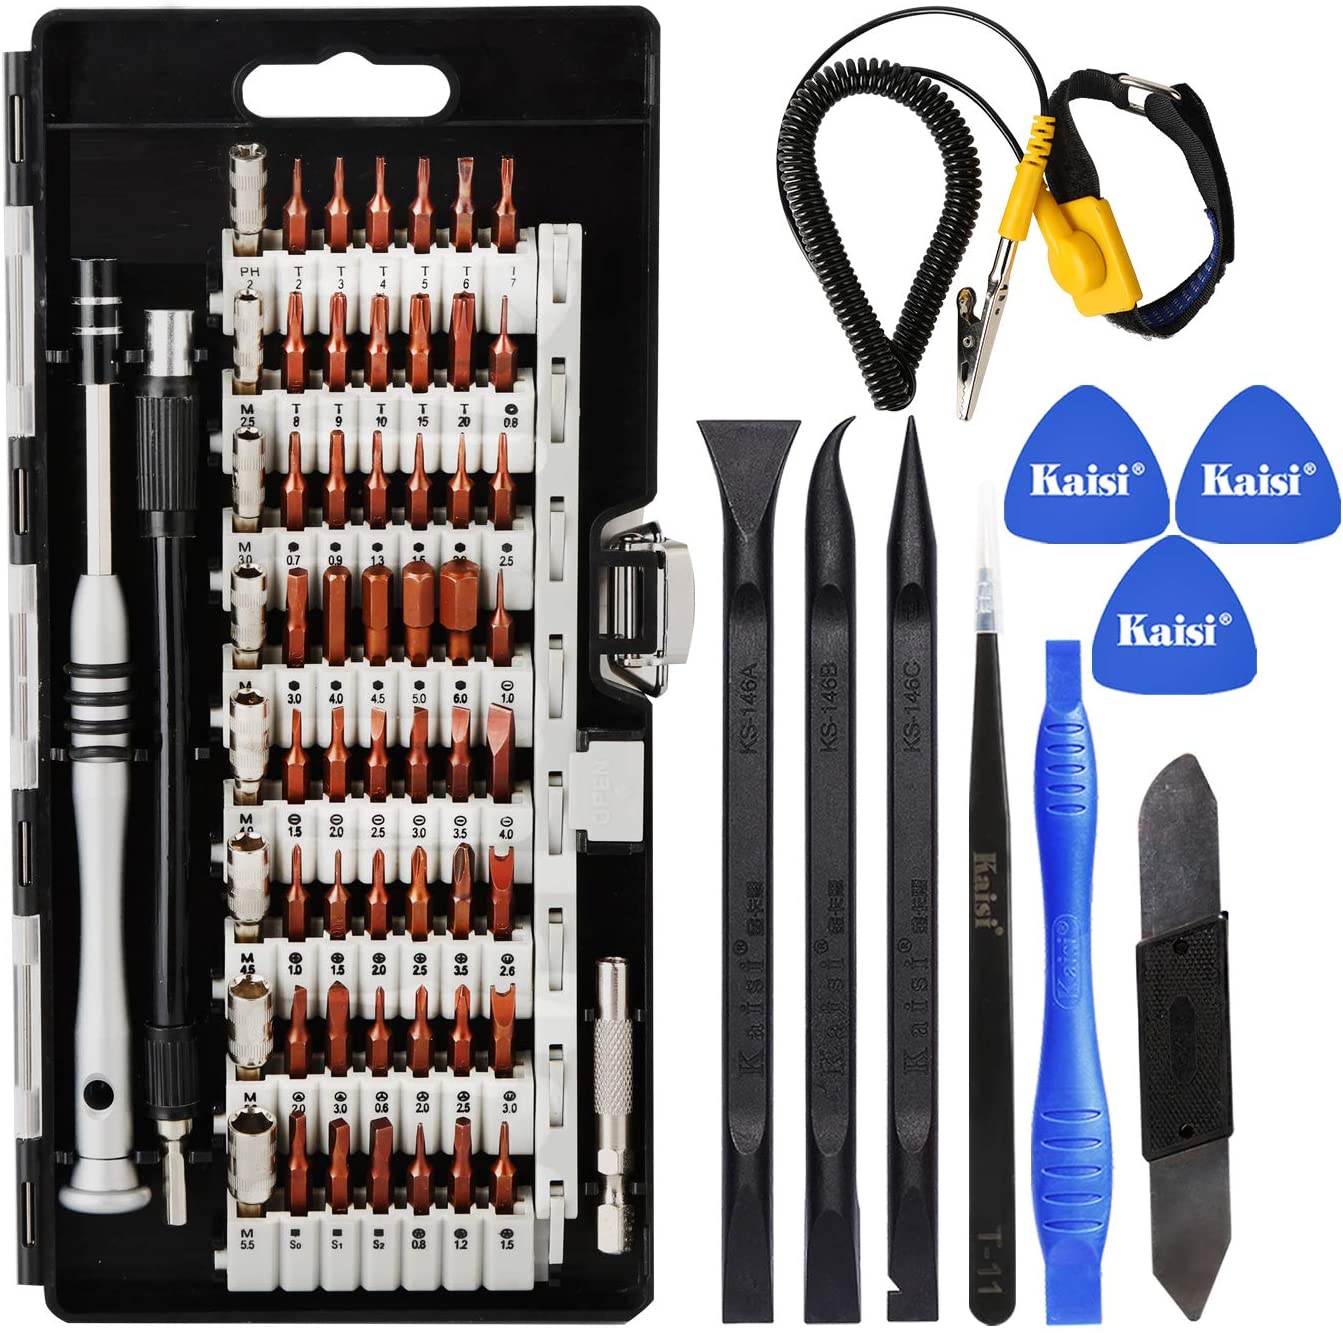 Kaisi 70 in 1 Precision Magnetic Professional Screwdriver Electronics Repair Tool Kit Set for Tablet, MacBook, PC, iPhone, Xbox, Game Console